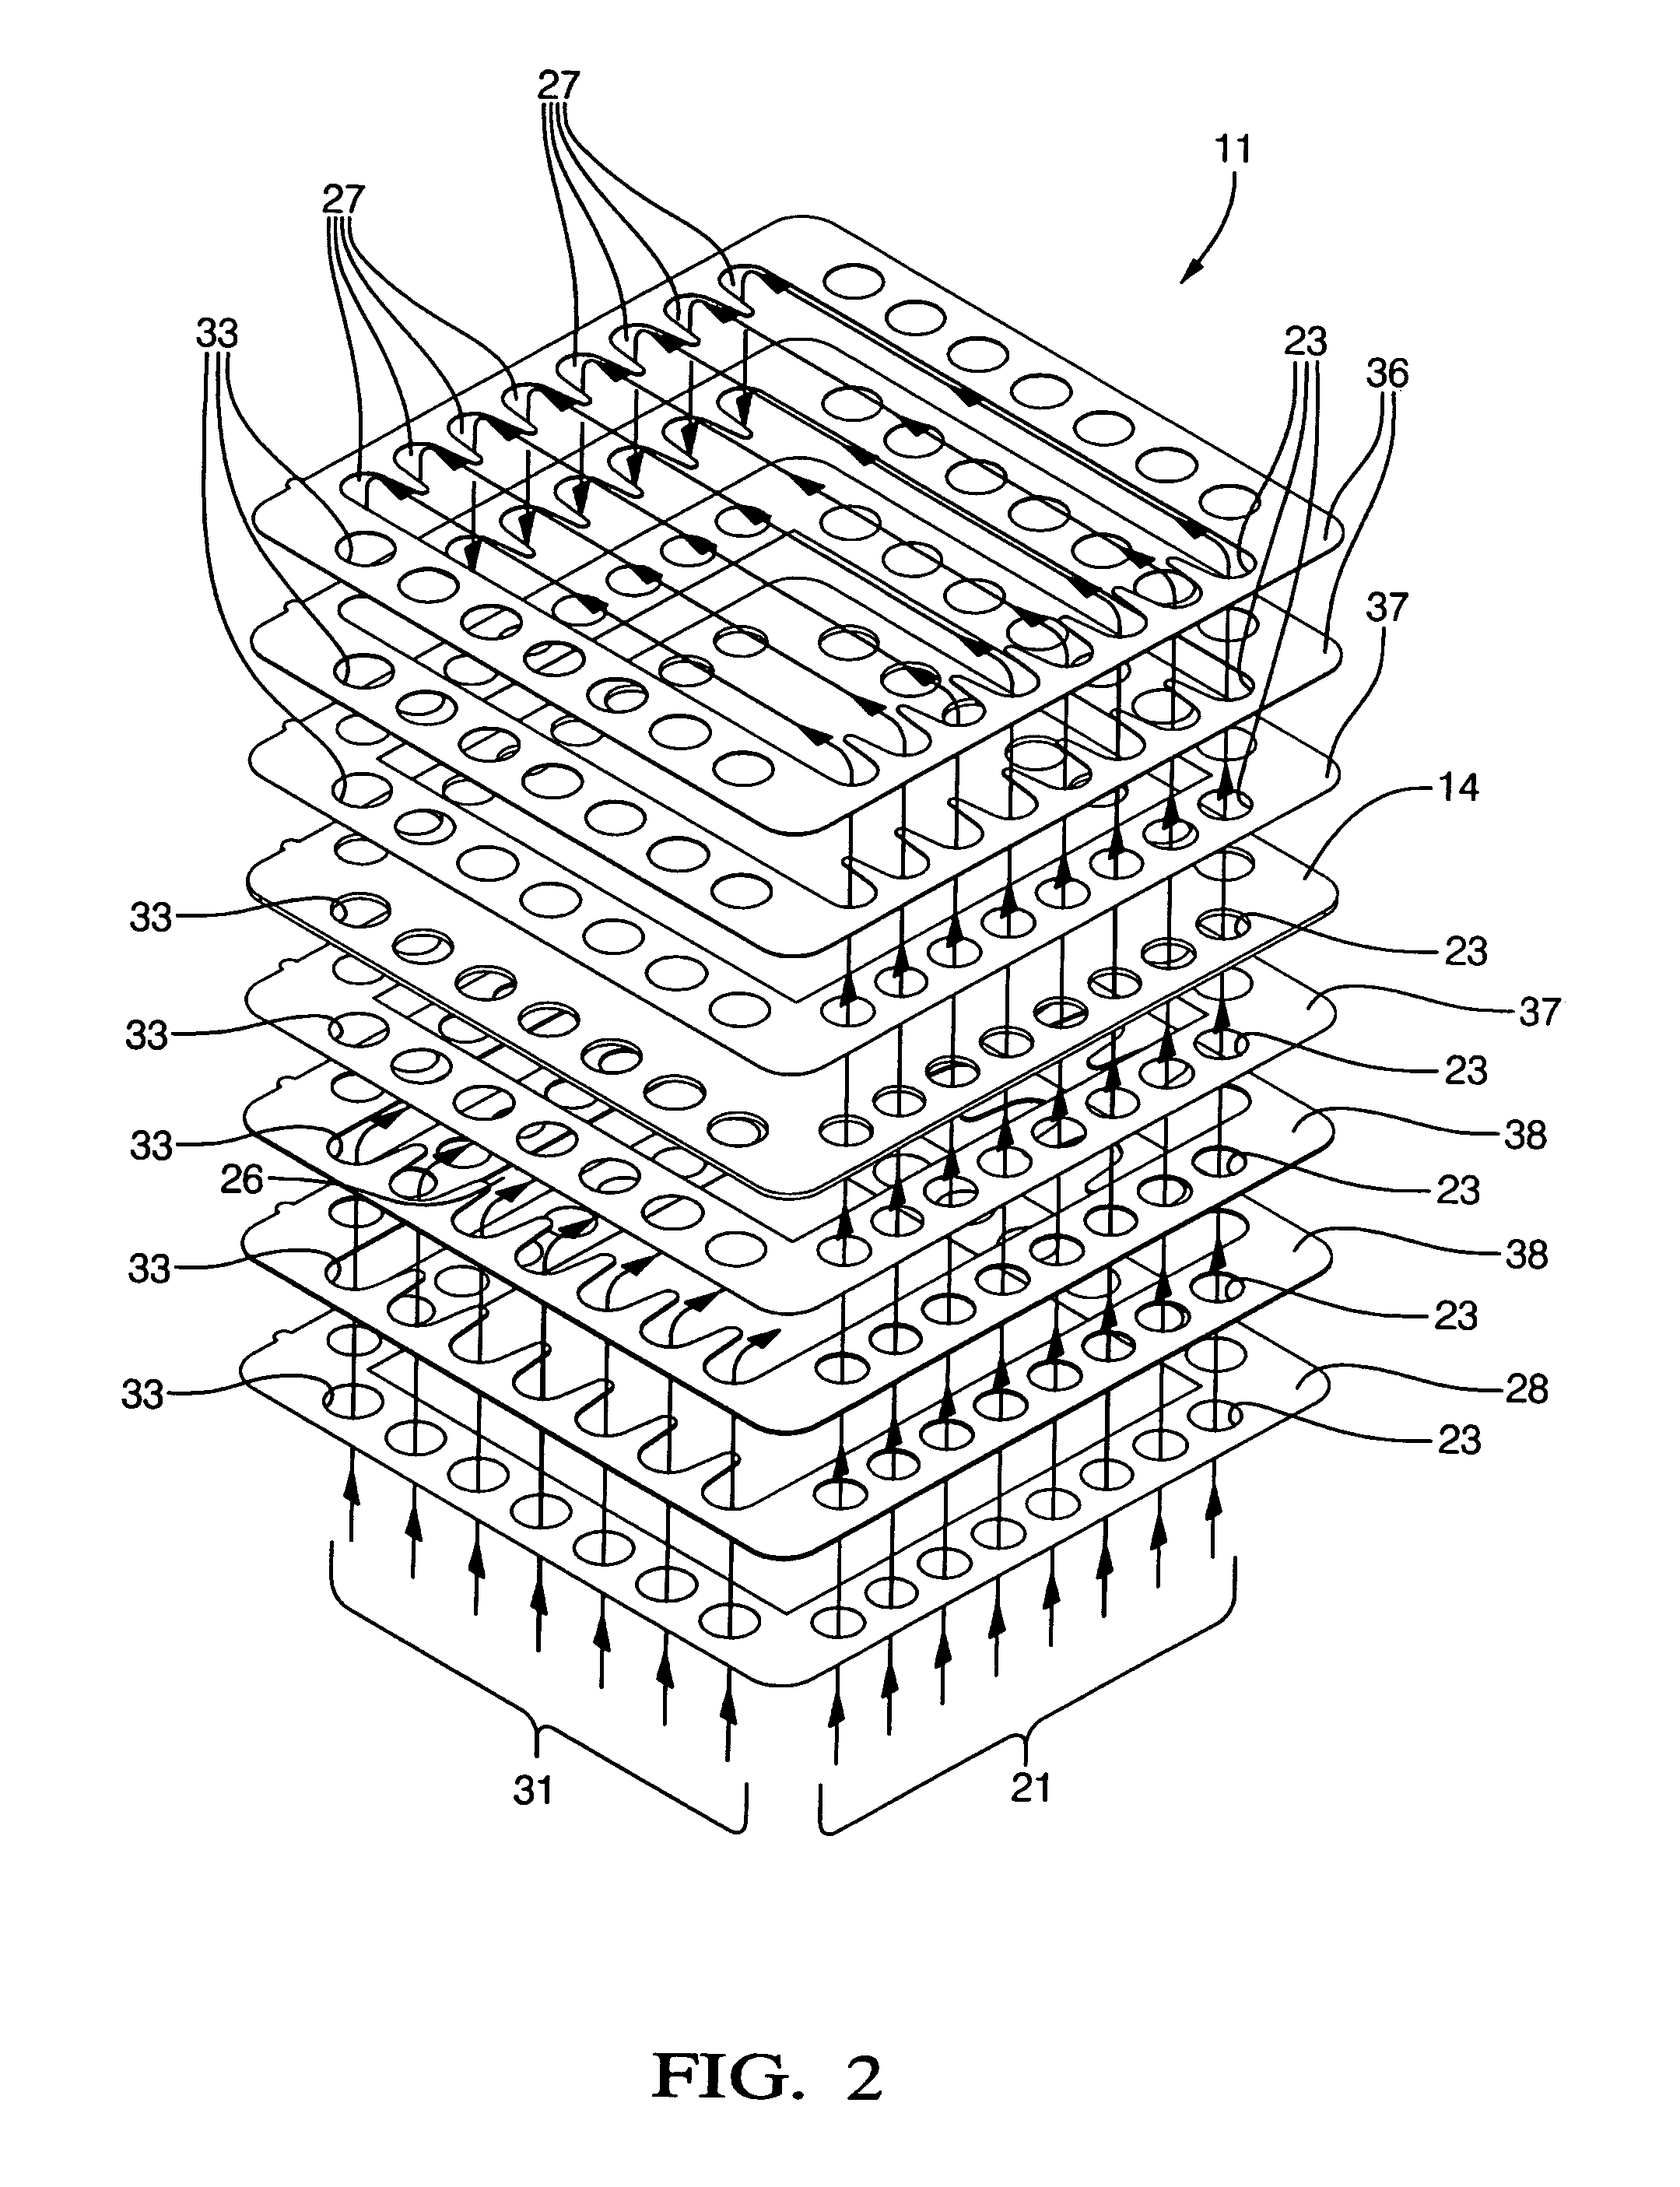 Fuel cell having optimized pattern of electric resistance